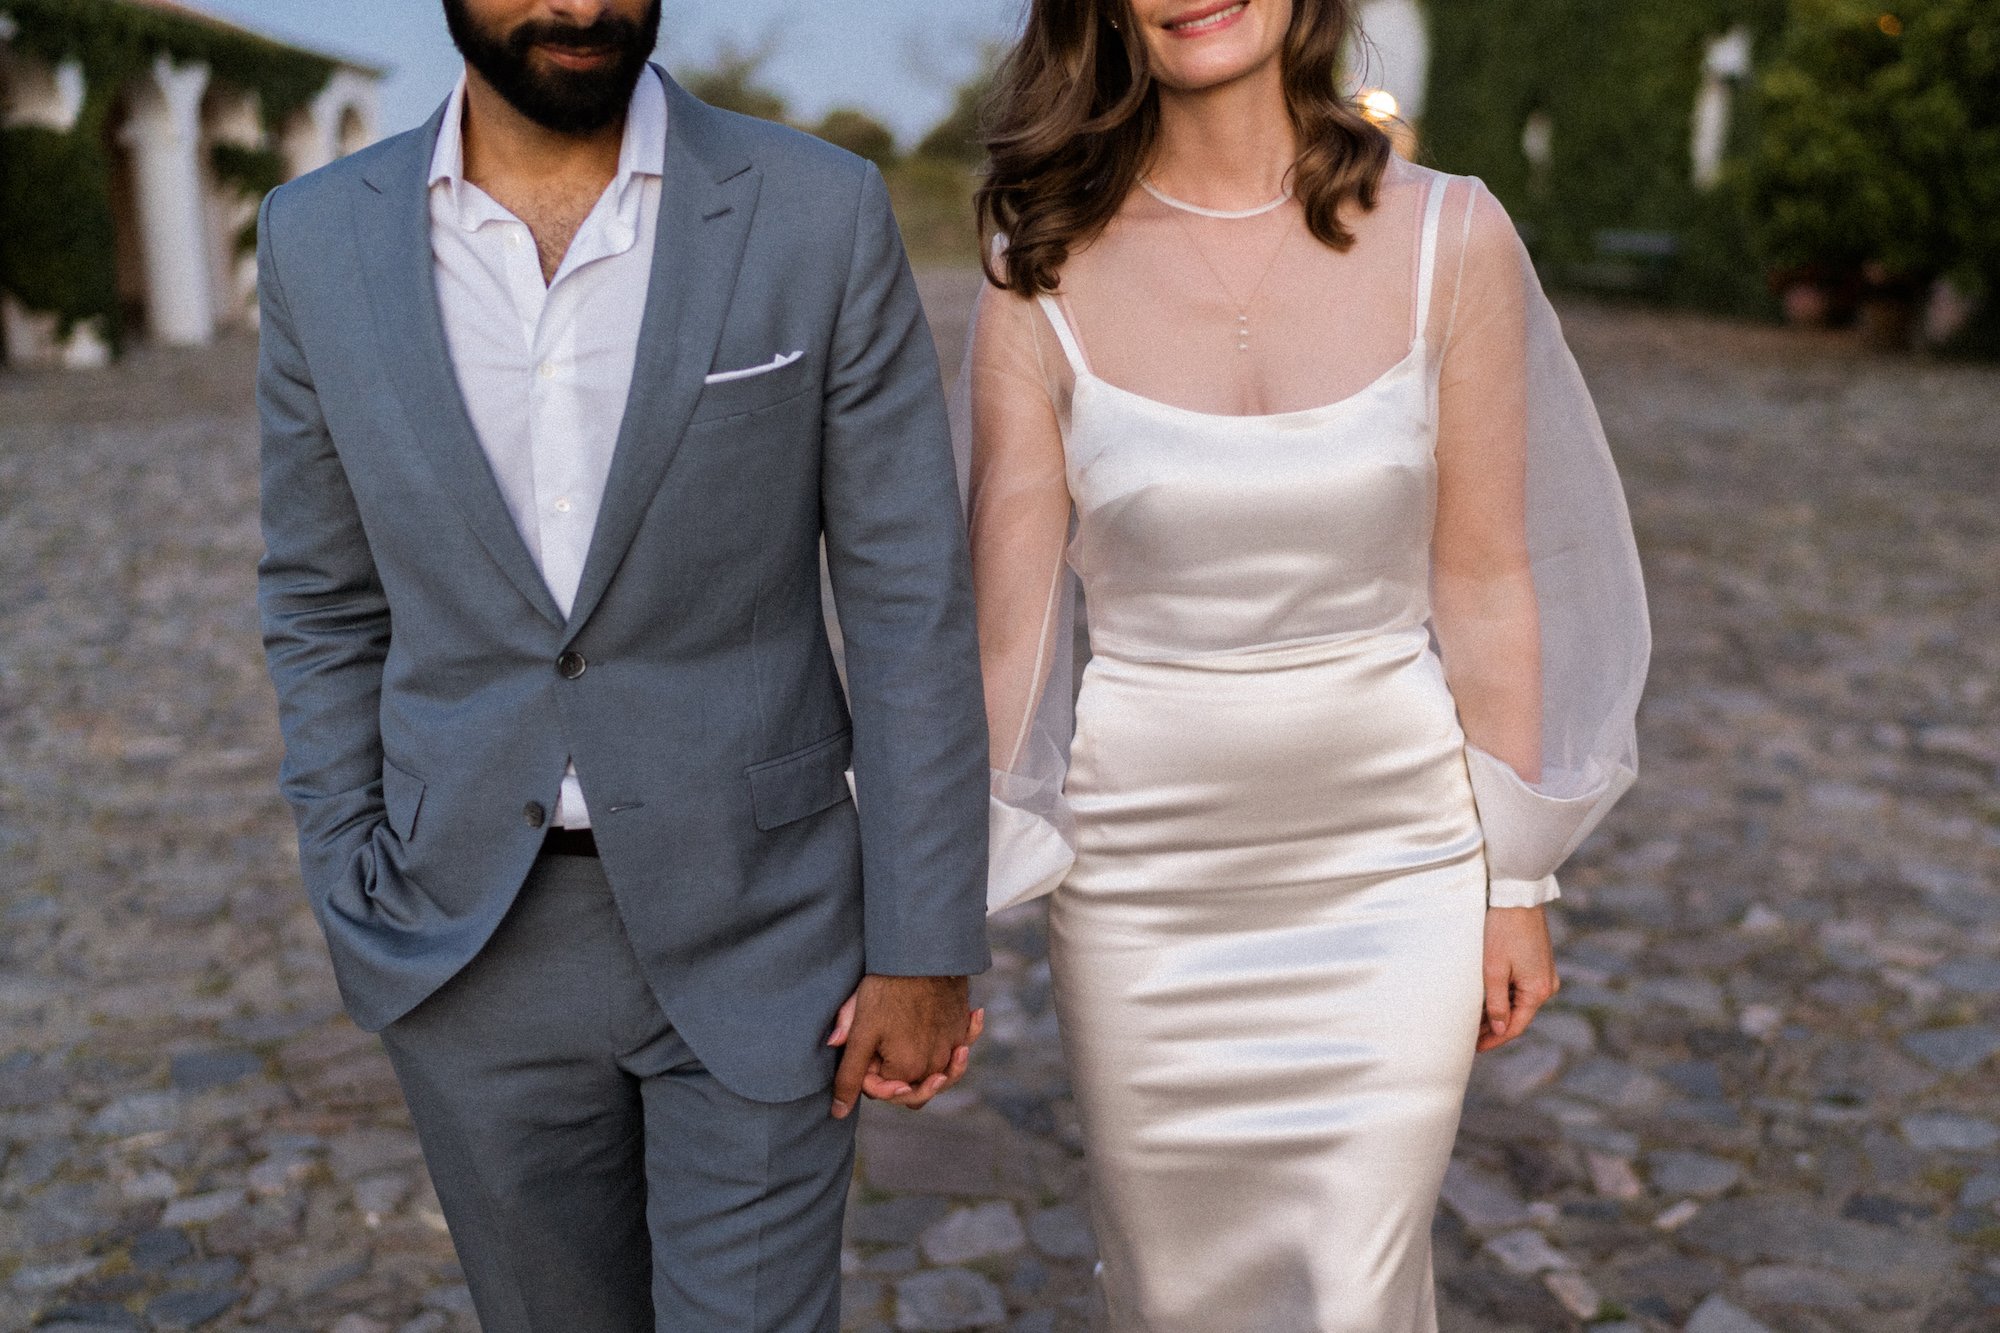 Beautiful bride Genevieve wore a wedding dress and a sheer top with statement sleeves by Halfpenny London